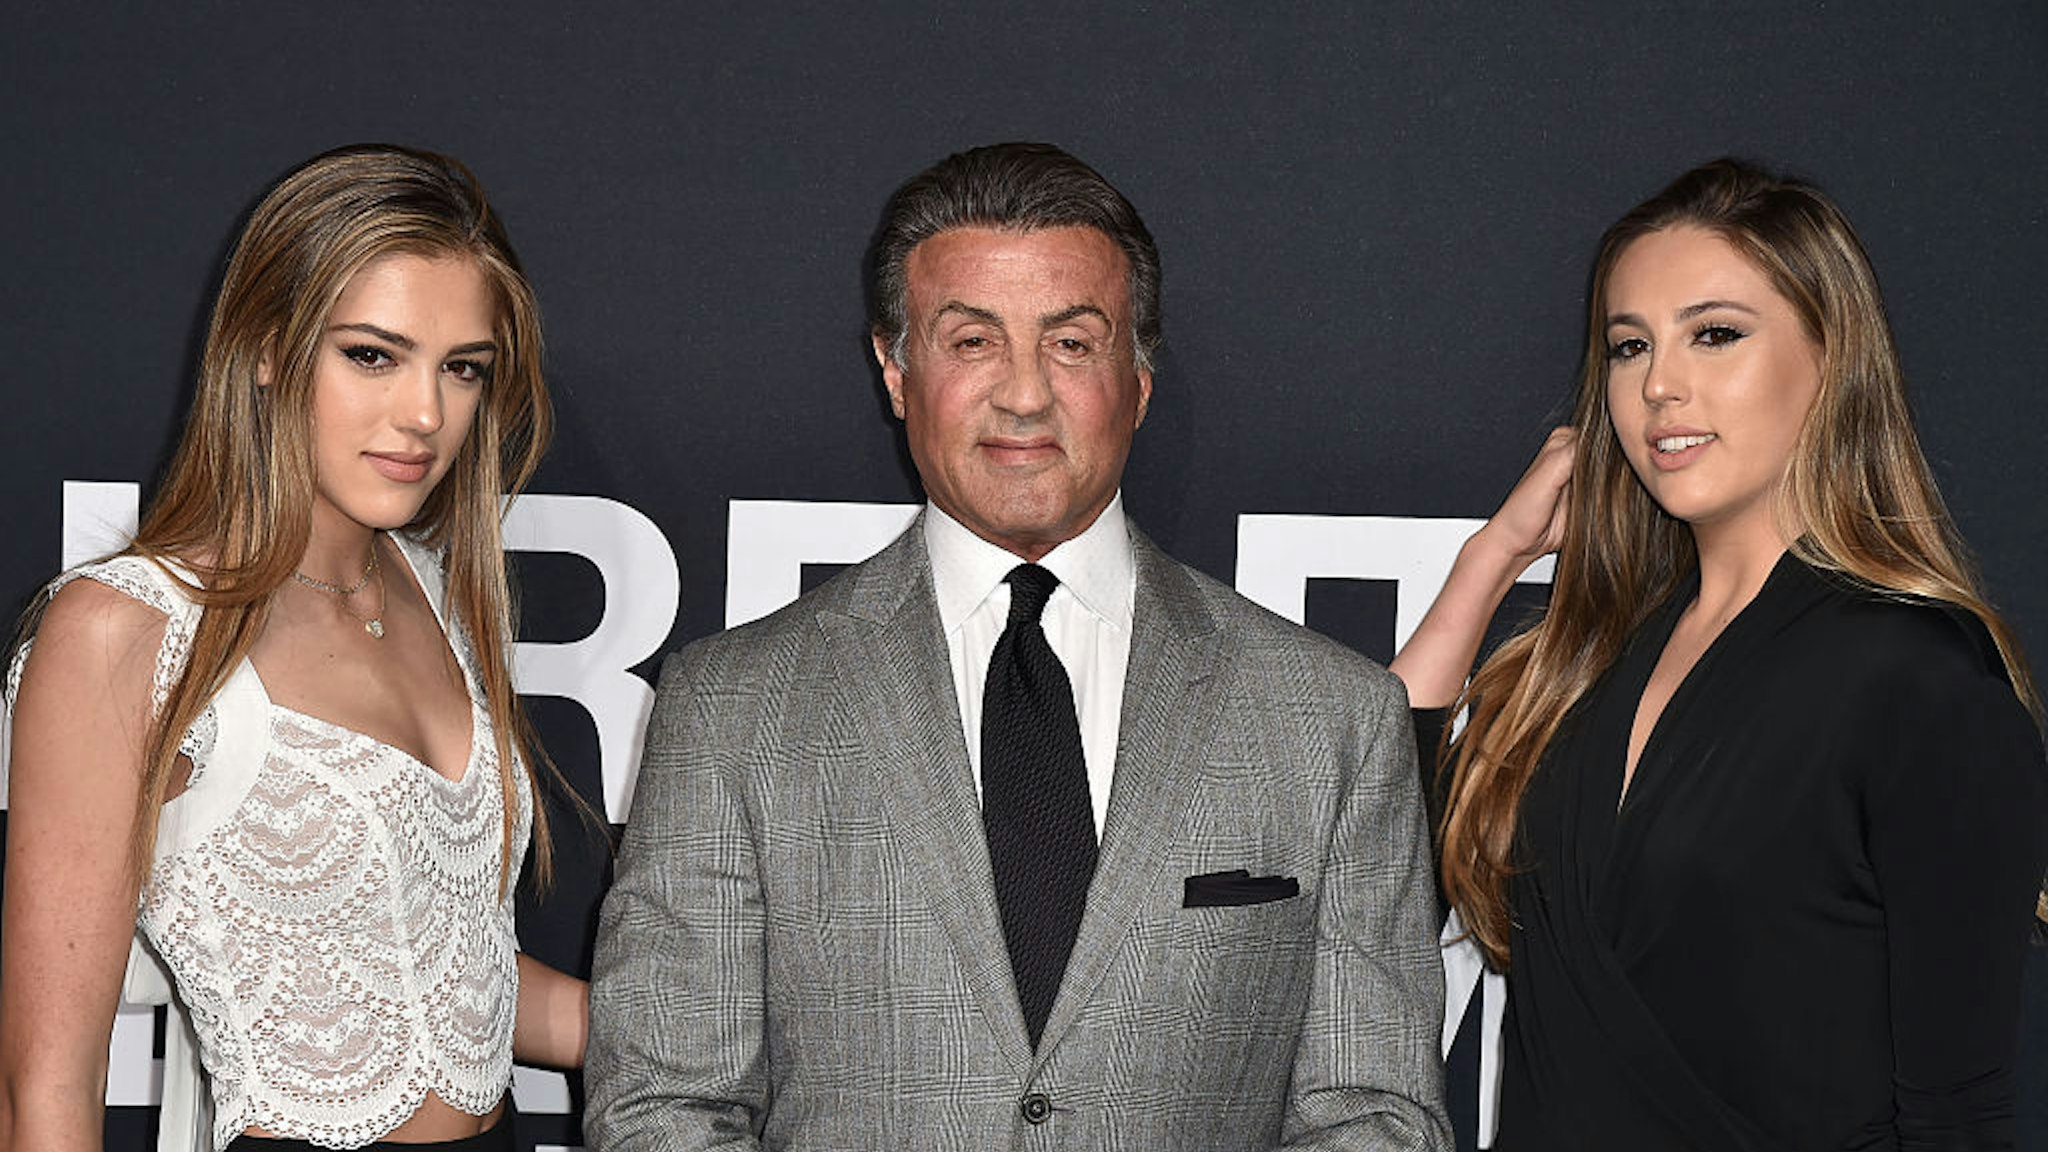 LOS ANGELES, CA - FEBRUARY 10: Actor Sylvester Stallone (C) and daughters Sistene Stallone (L) and Sophia Stallone (R) attend Saint Laurent at Hollywood Palladium on February 10, 2016 in Los Angeles, California. (Photo by C Flanigan/WireImage)